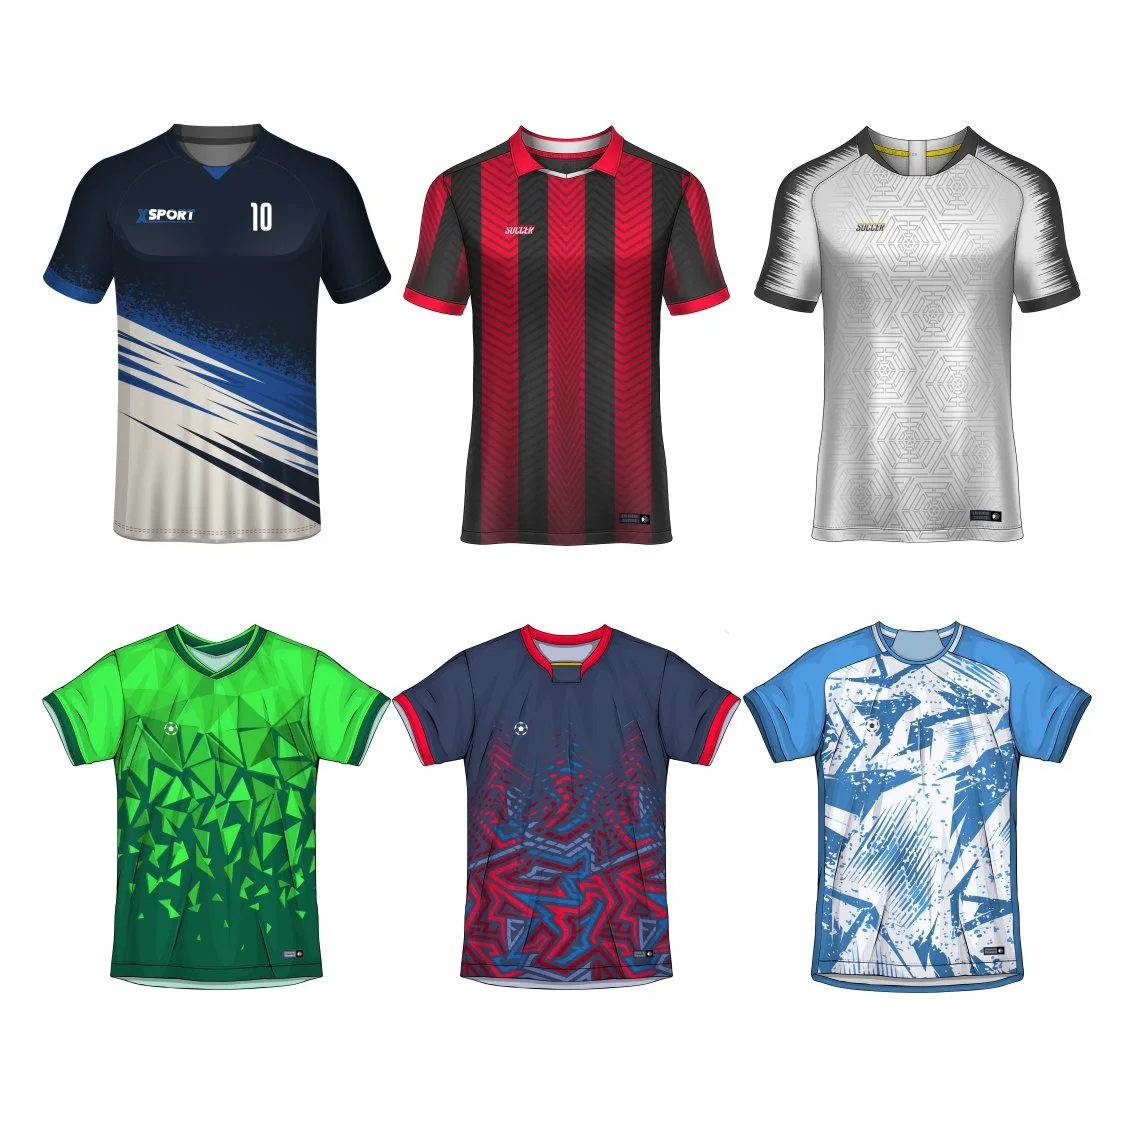 Custom Sublimation Polyester Men's Polo Shirts Soccer Golf Fishing Football Tennis Sports Shirt Breathable and Quick Dry Heavyweight Women's T-Shirts